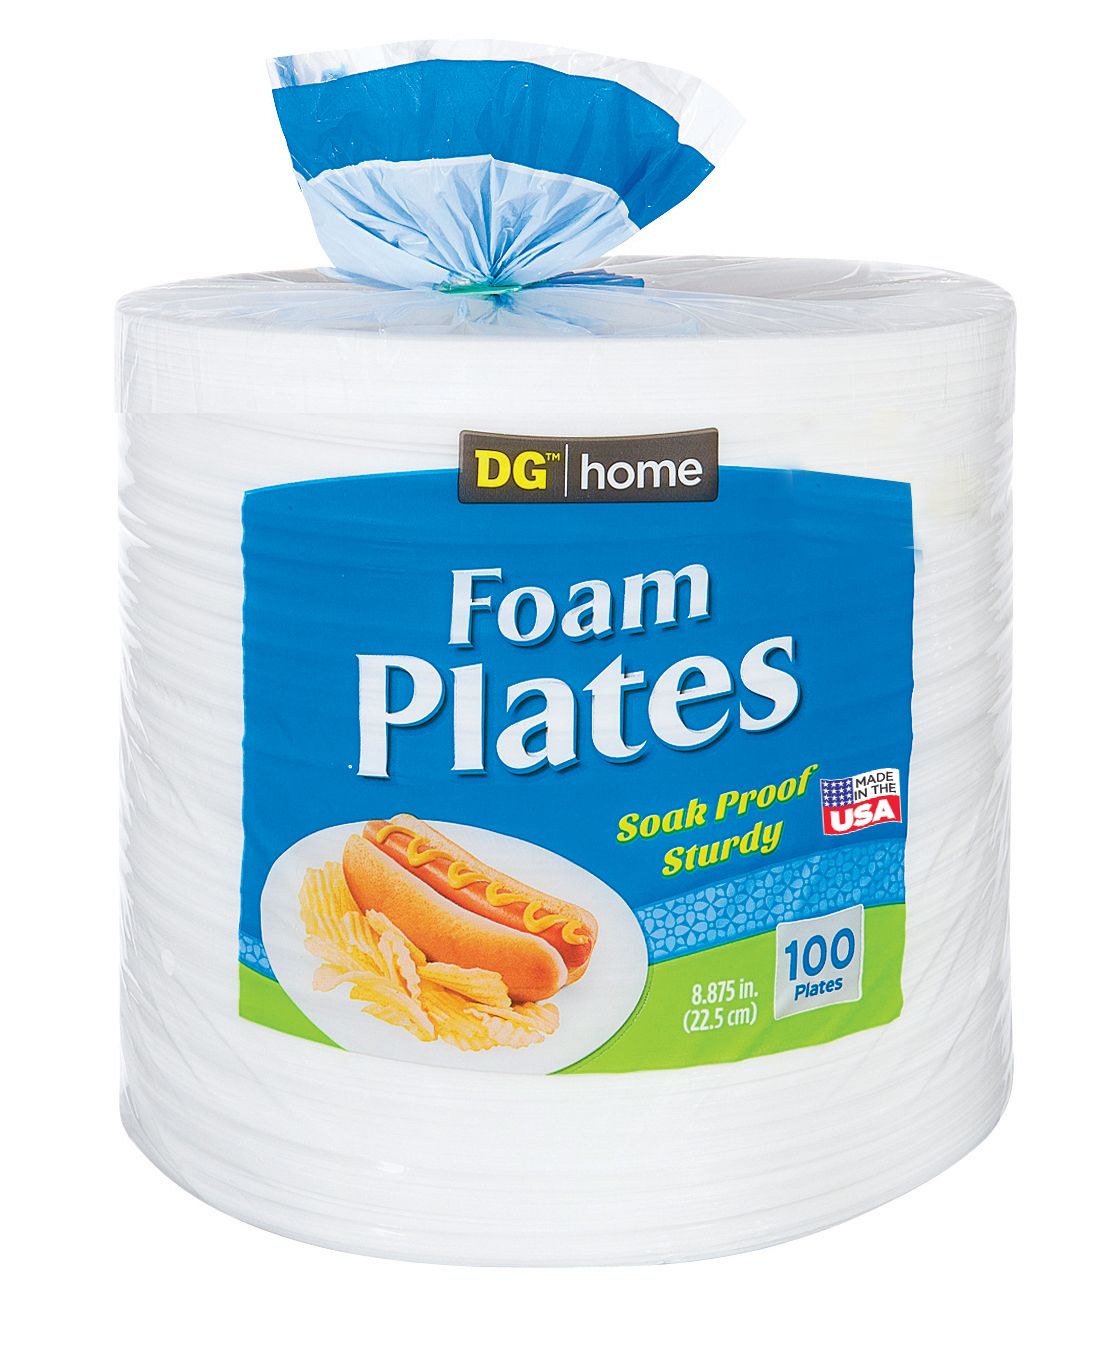 DG Home Foam Plates, 100 Ct. on Sale At Dollar General